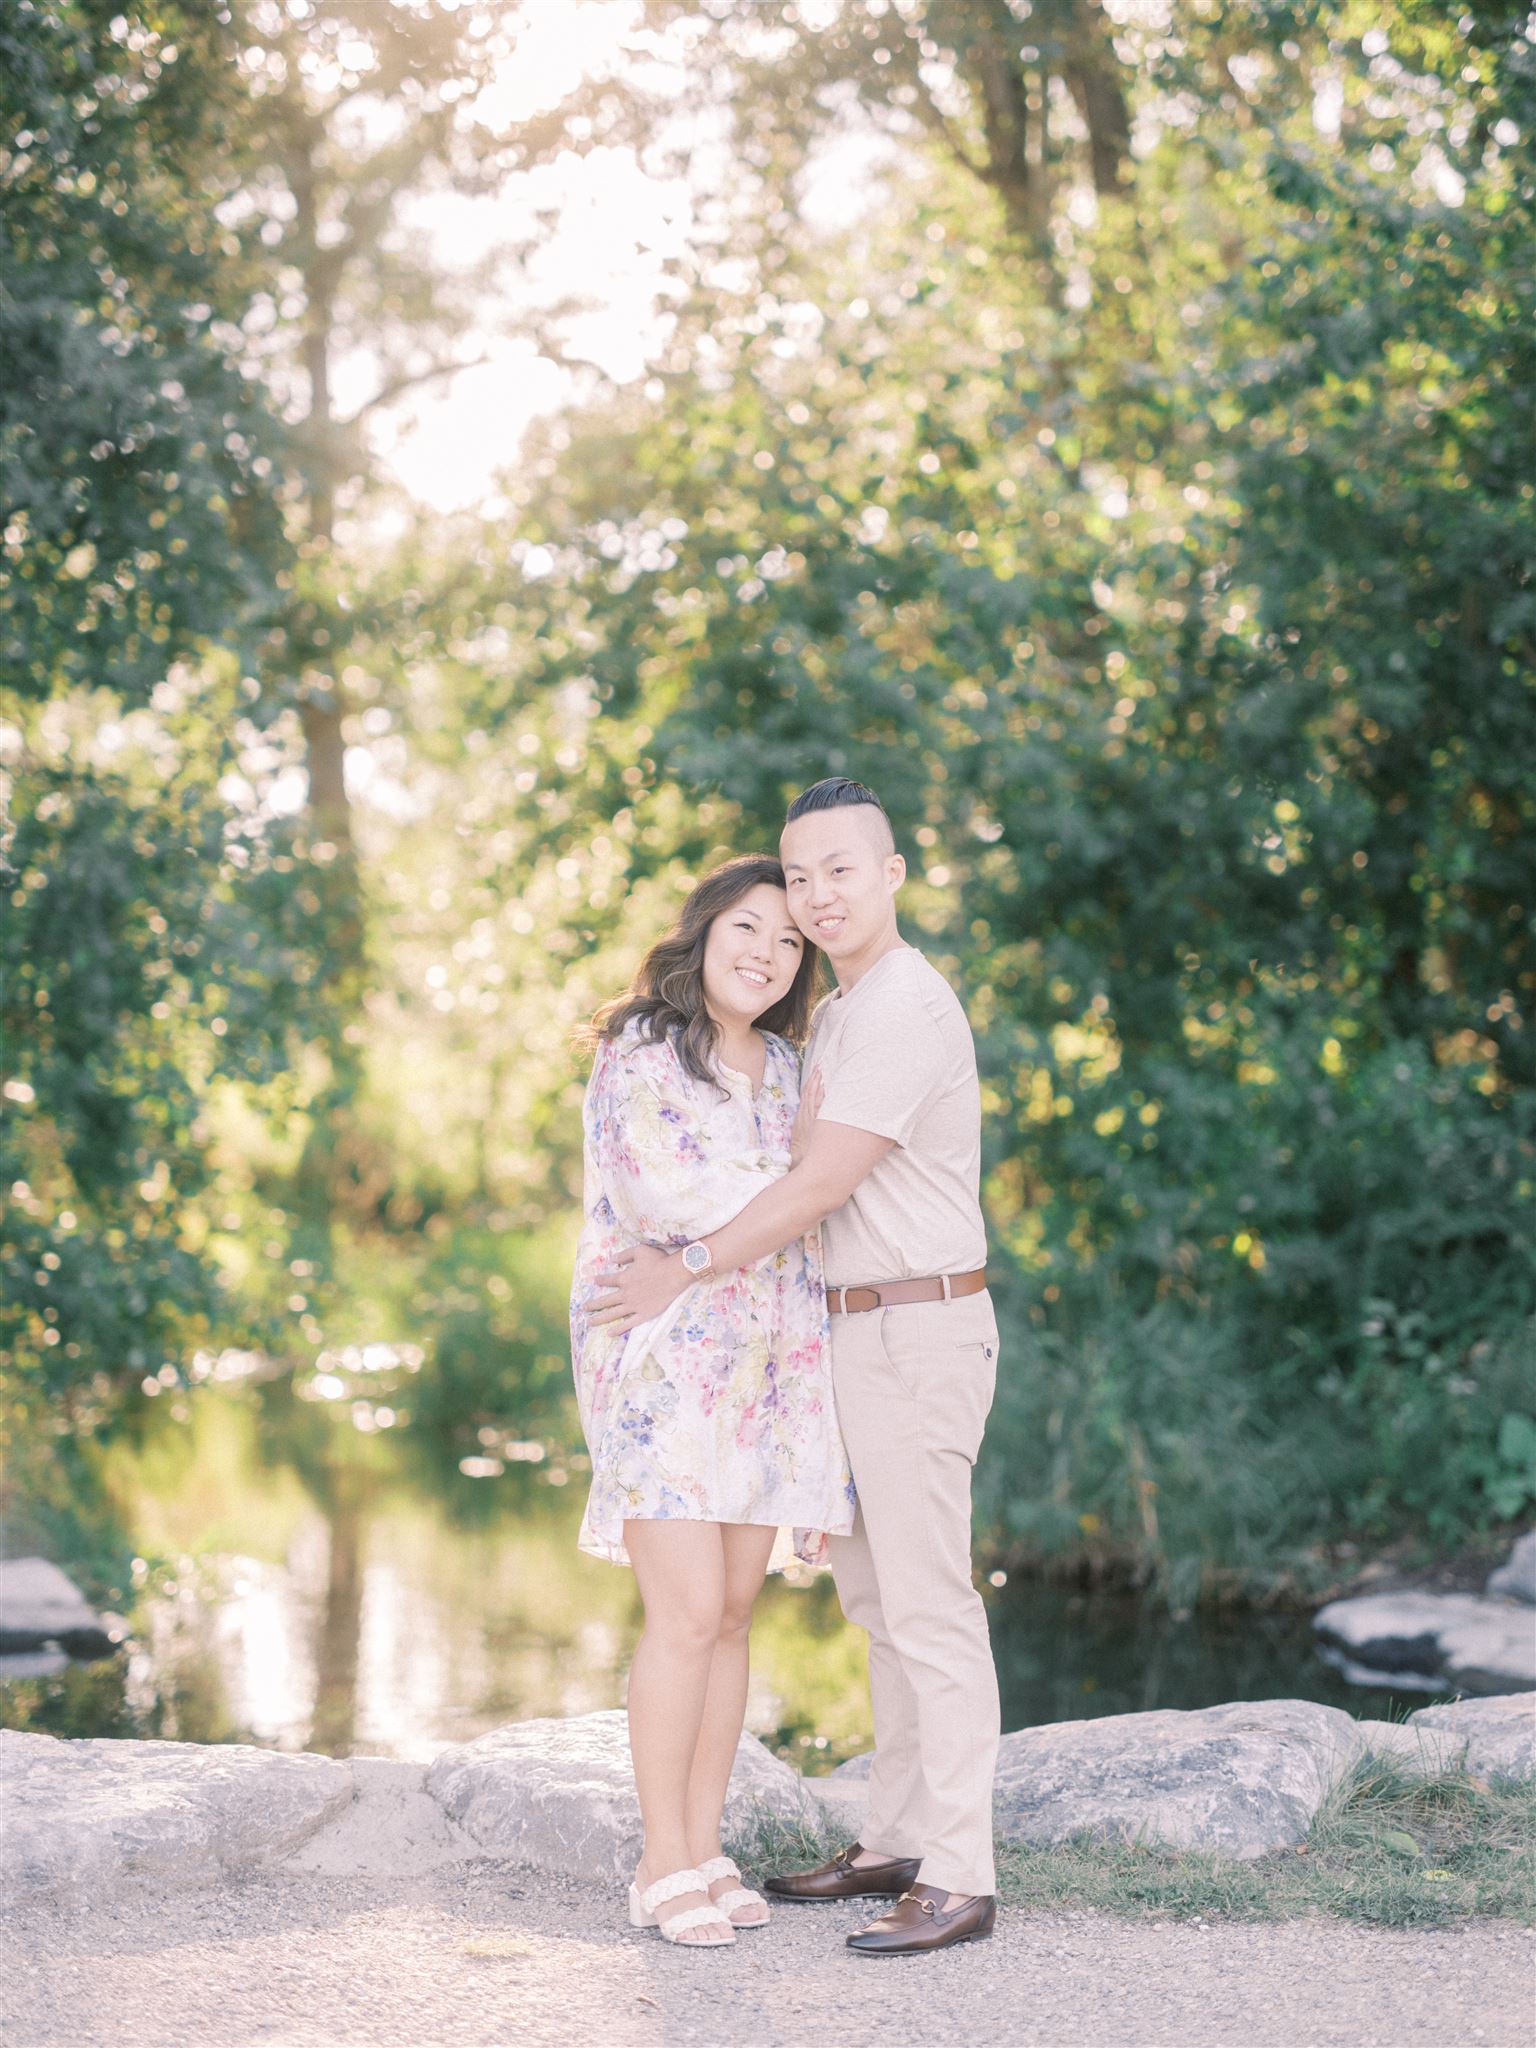 fun engagement poses, spring engagement, floral engagement dress, flower engagement dress, sunset engagement, editorial engagement photos, film engagement, film photography, best wedding photographers canada, flirty engagement poses